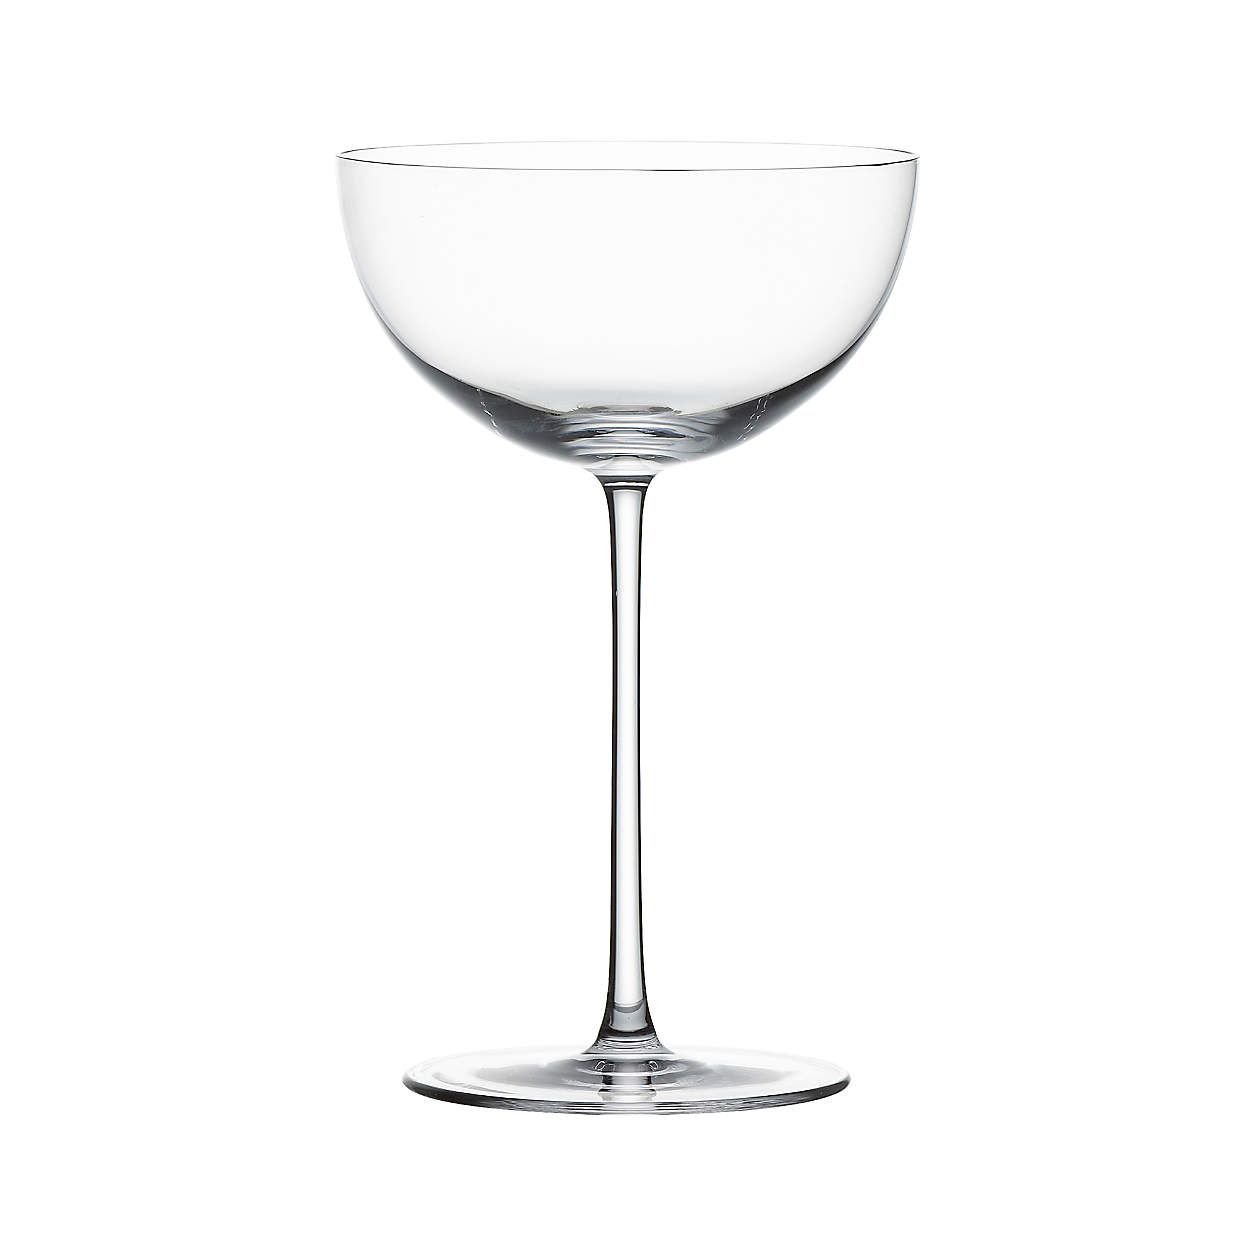 Camille Long Stem Champagne Coupe Glass + Reviews | Crate & Barrel | Crate & Barrel